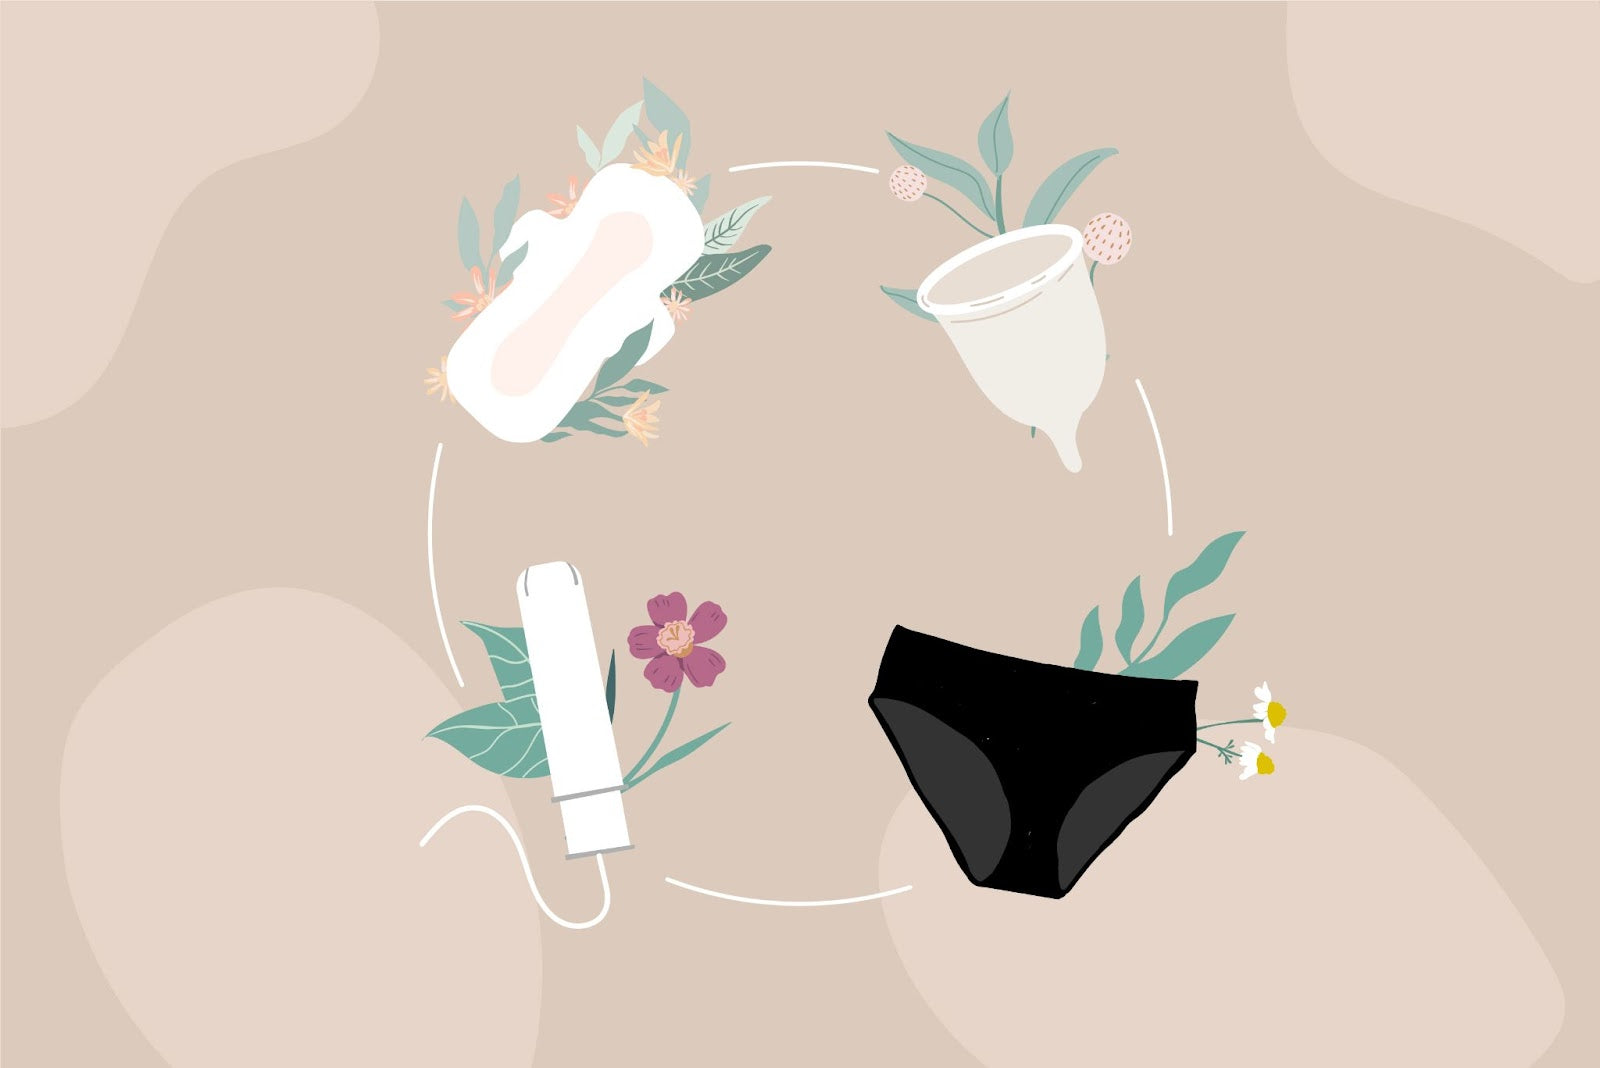 Drawing of a menstrual cup, menstrual pad, tampon and underwear in a circle against a beige background.